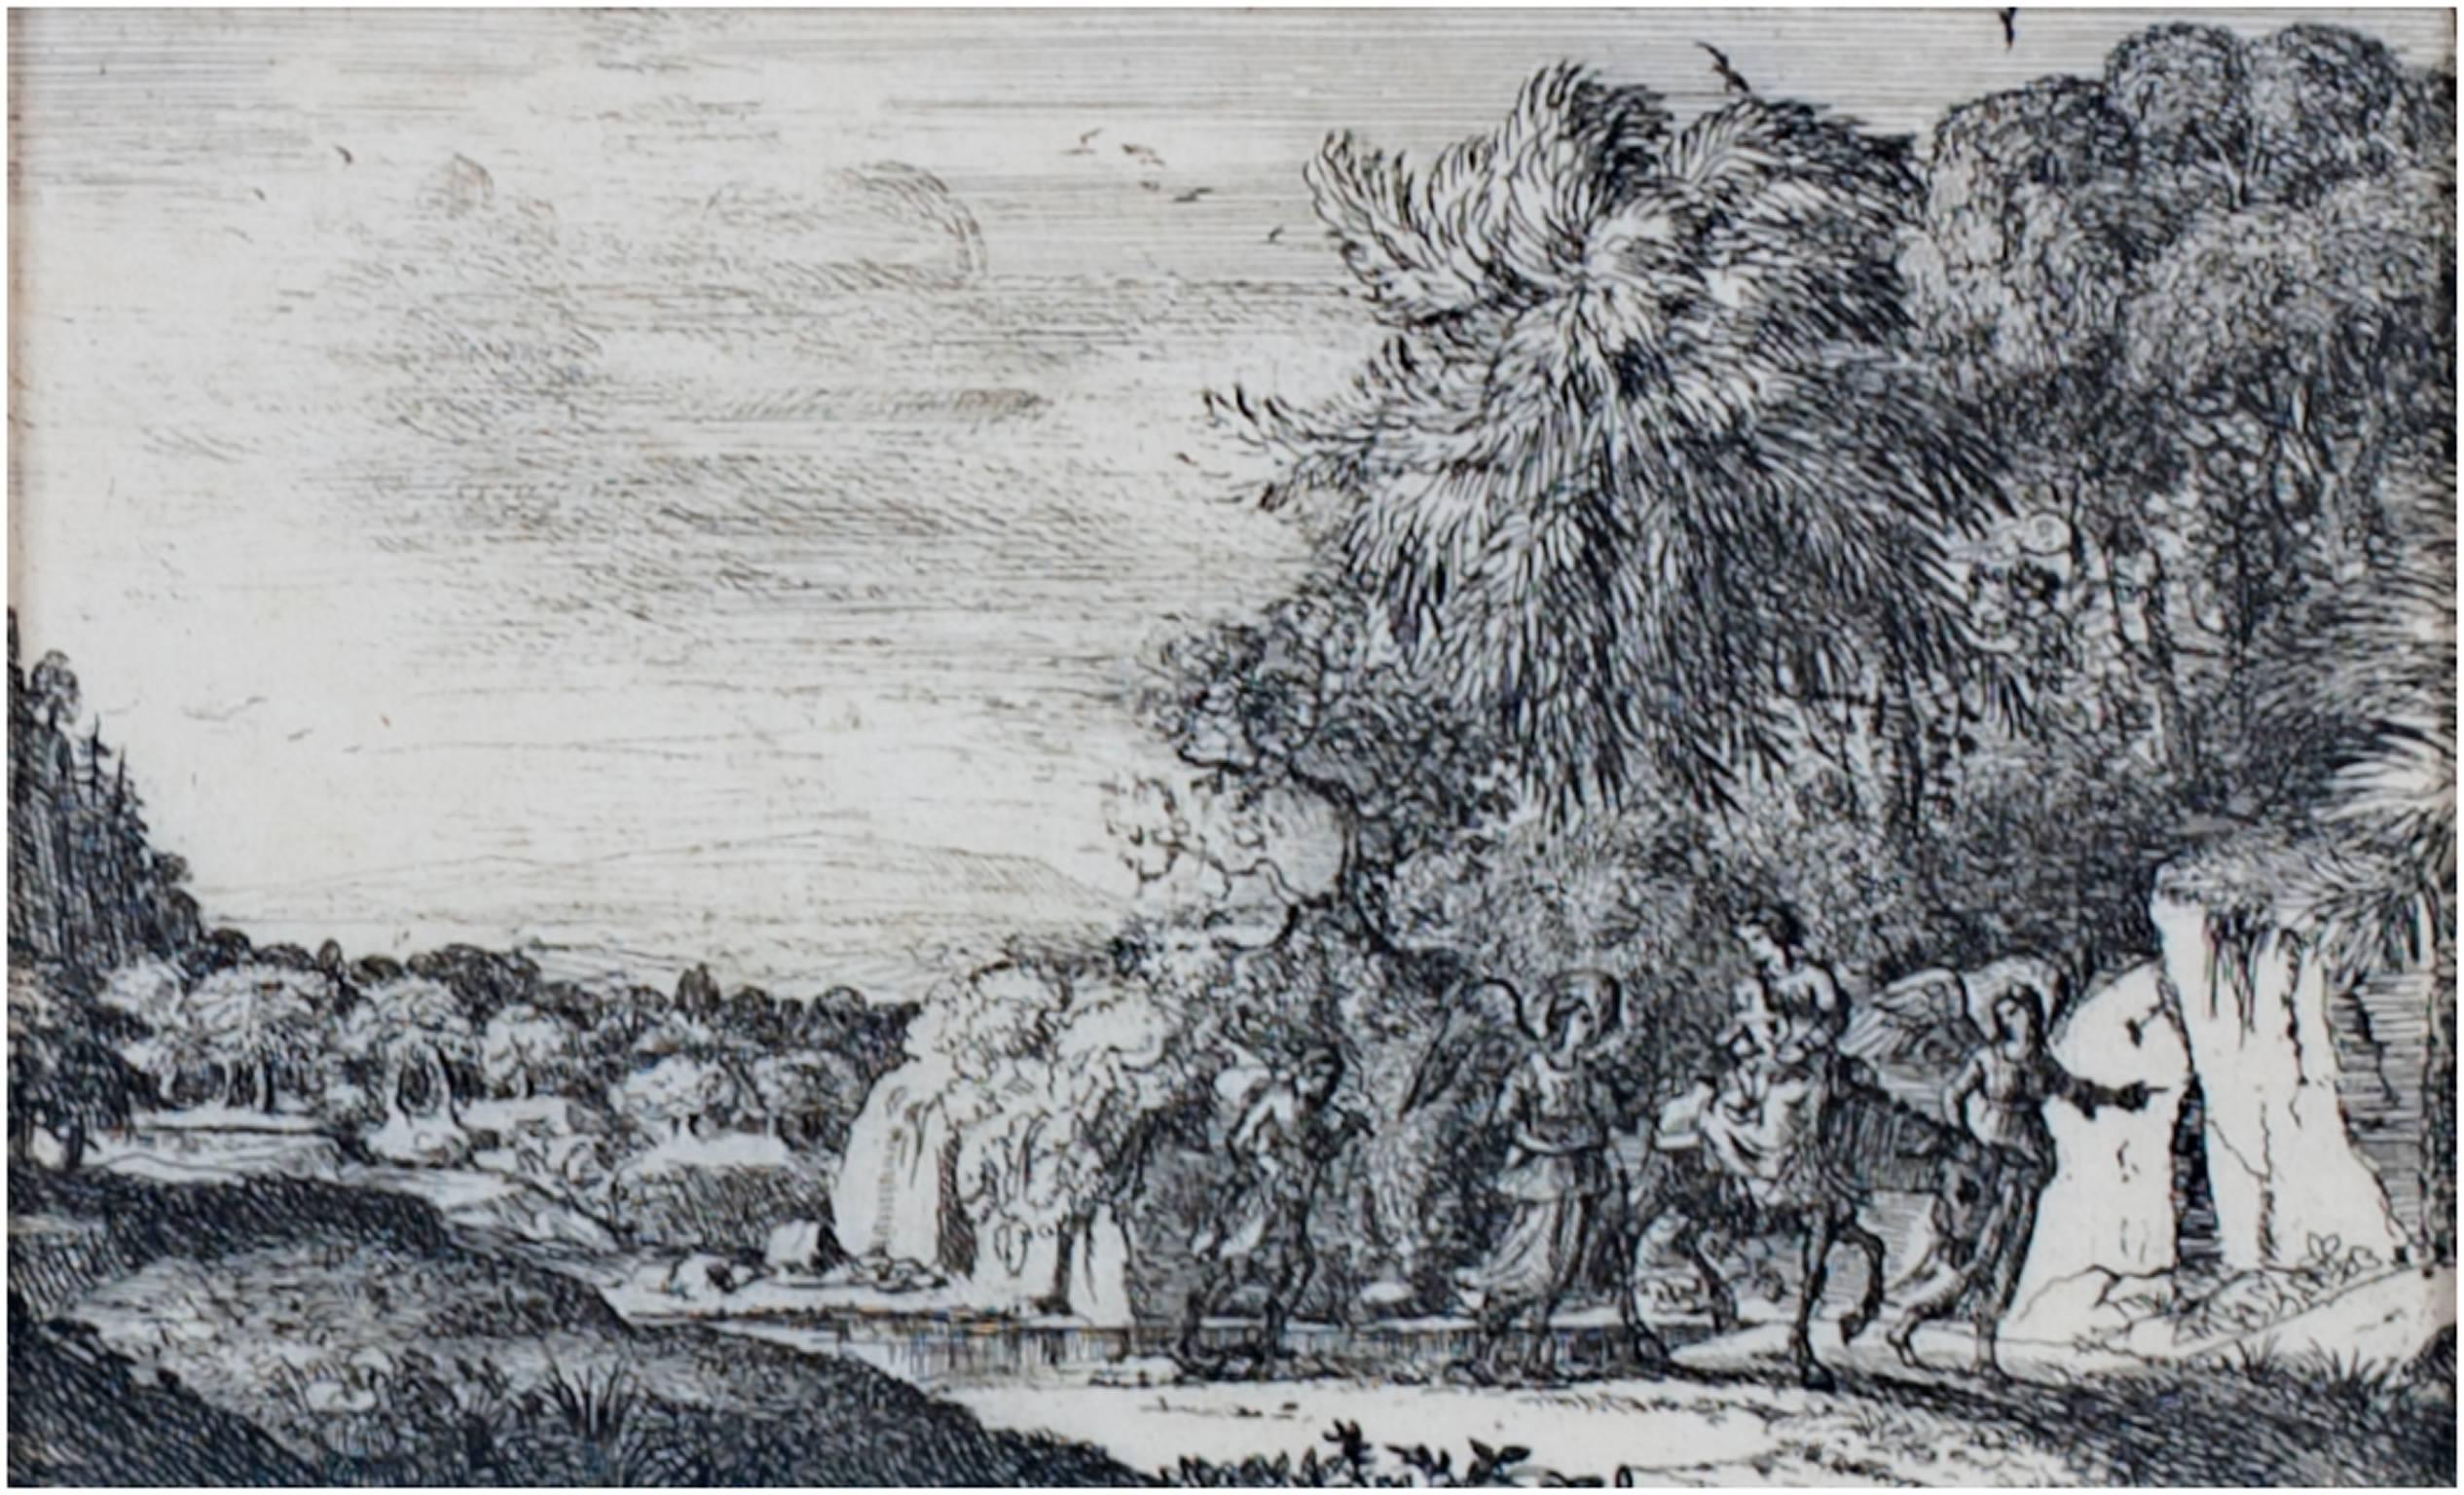 "La Fuite en Egypte (The Flight into Egypt)" is an original etching by Claude Lorrain (Claude Gelee). This piece depicts the biblical story of Mary, Joseph, and the infant Jesus going onto Egypt. One edition of this print is in the collection of the